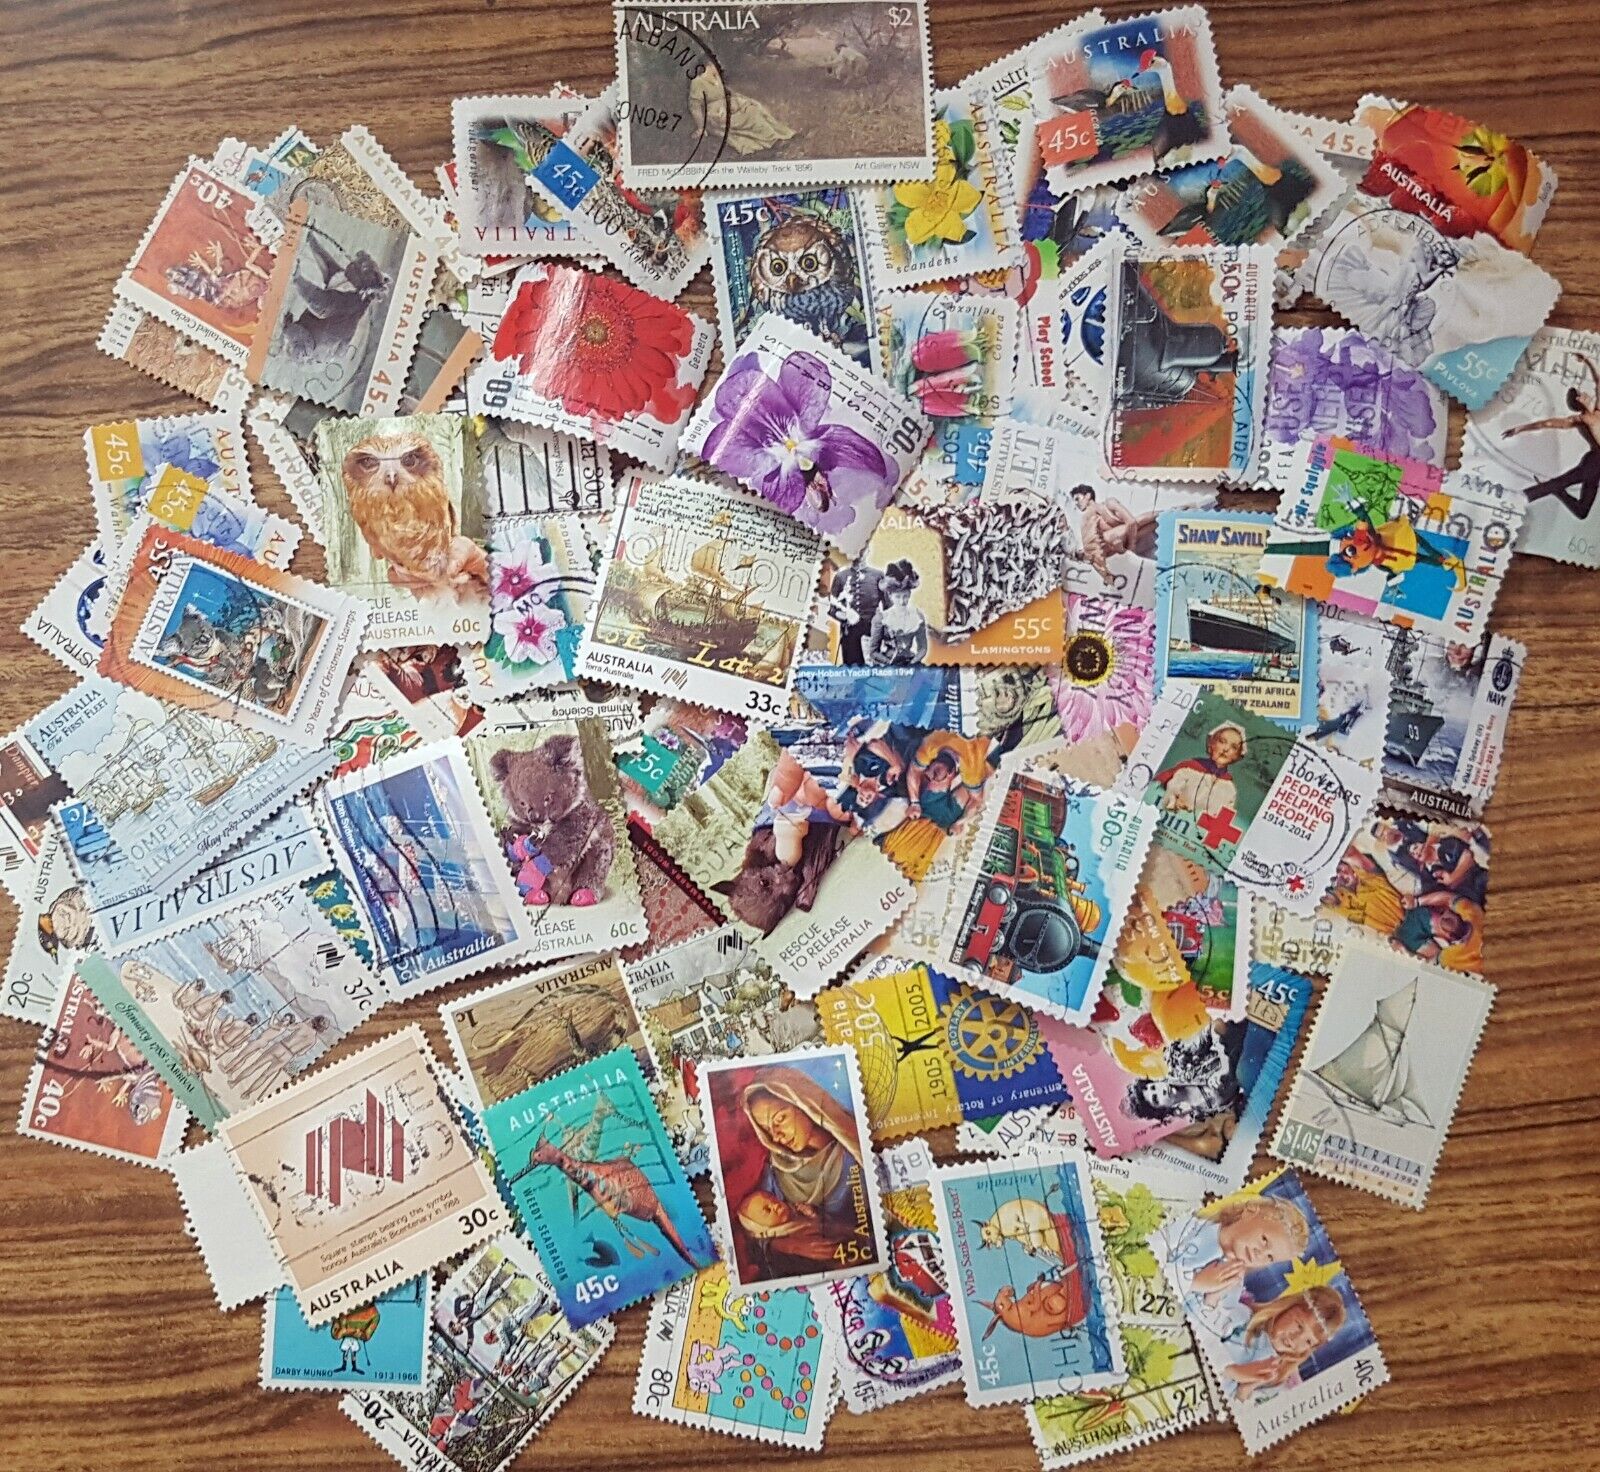 Bulk lot clearance 100+ Australian Decimal Postage Stamps off paper mixed #102